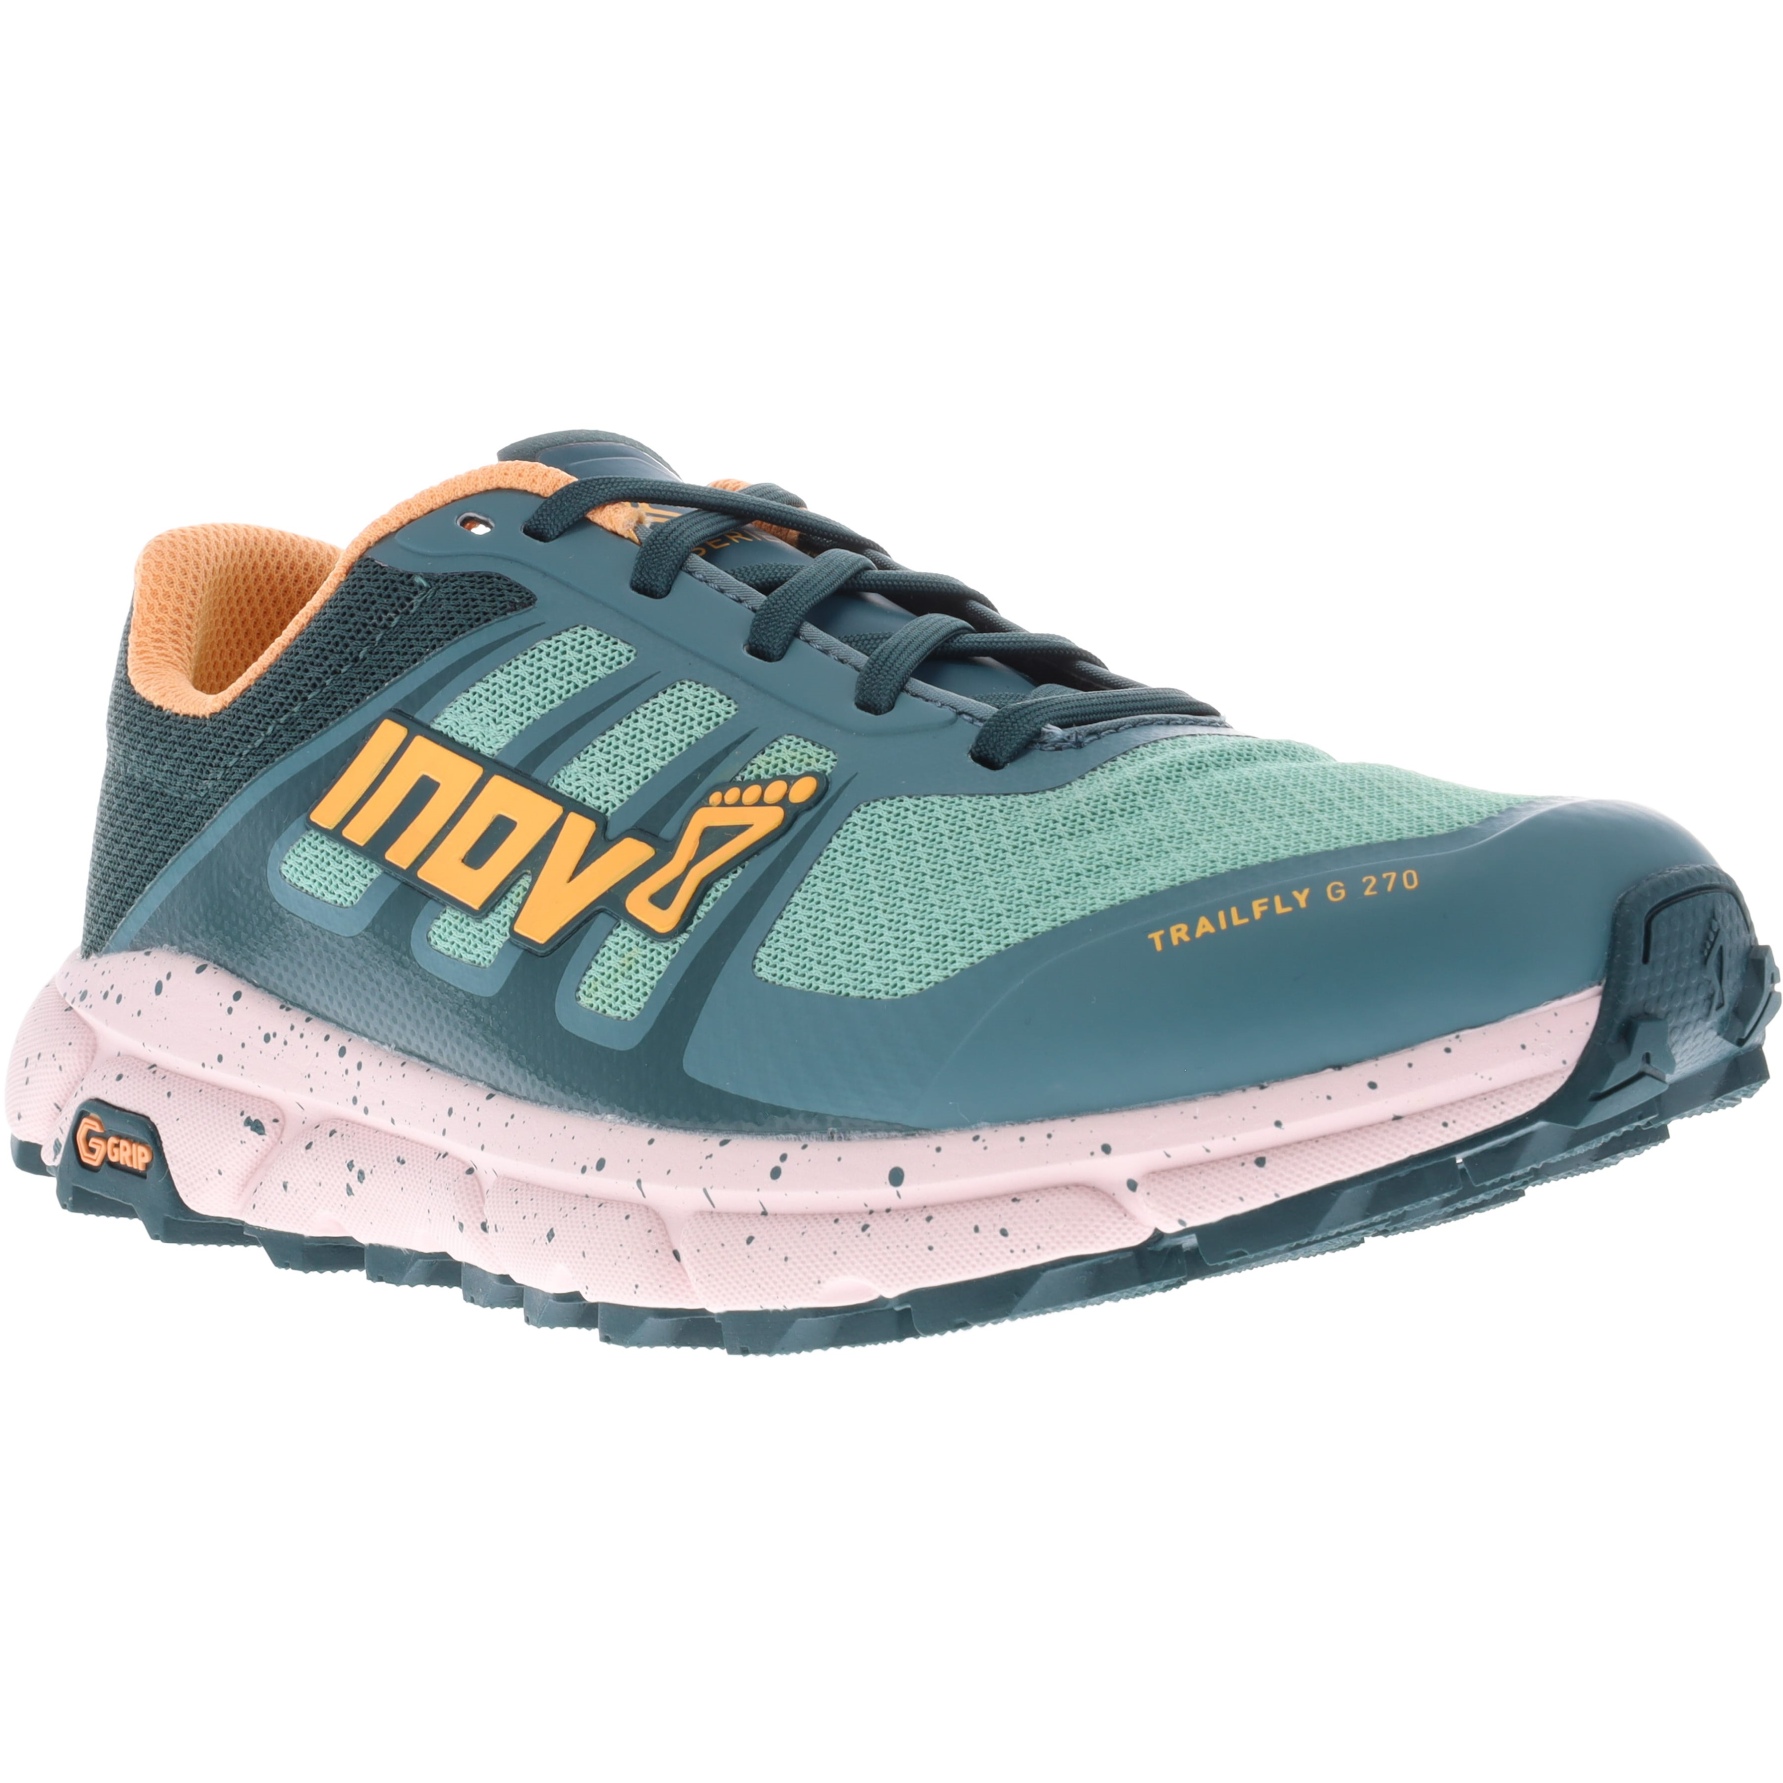 Picture of Inov-8 TrailFly G 270 V2 Wide Women&#039;s Running Shoes - pine/peach